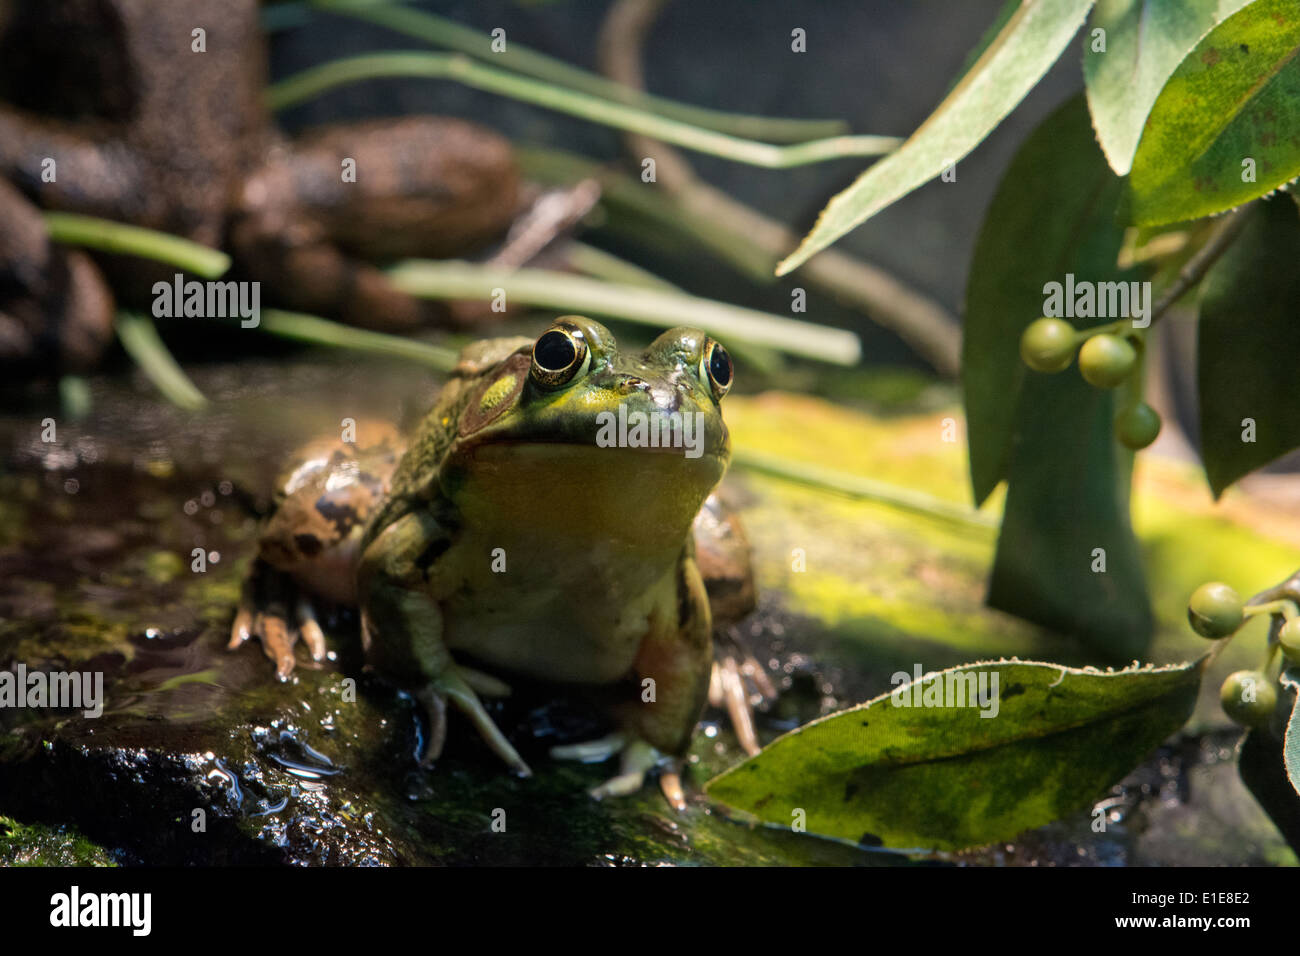 A Green Frog. Stock Photo